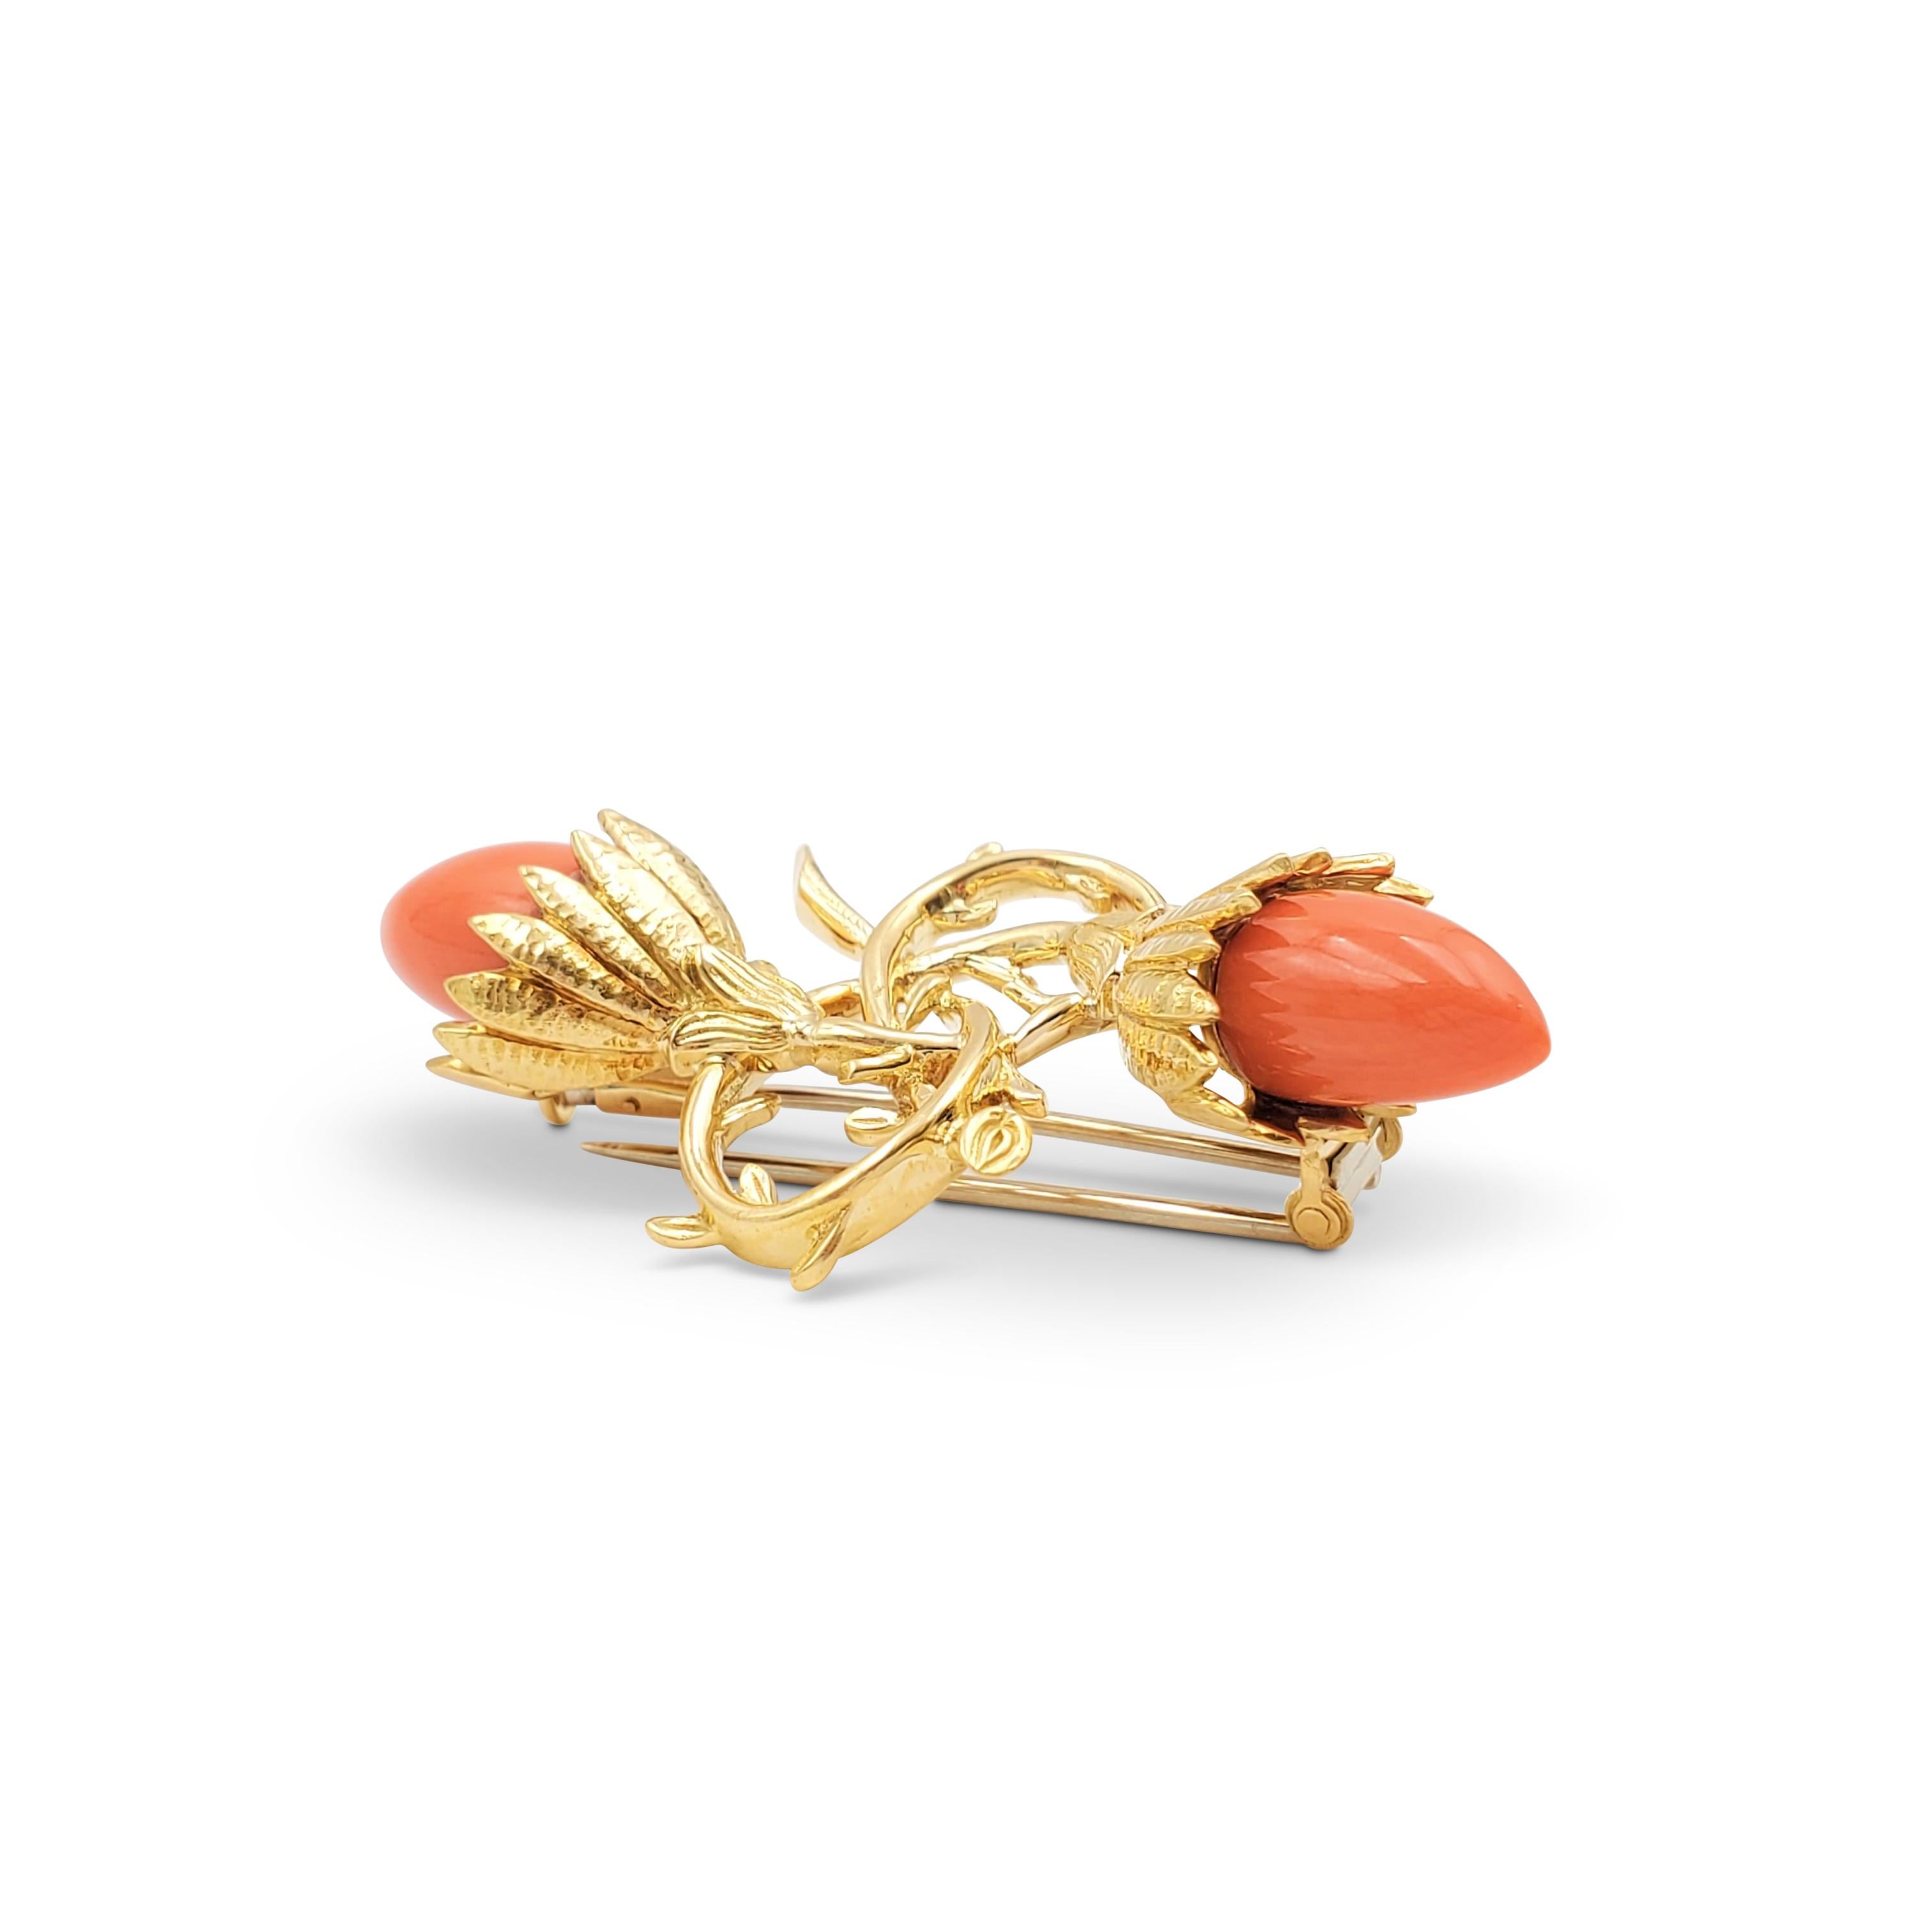 Authentic Jean Schlumberger for Tiffany & Co. acorn and foliate form brooch is set with two carved coral stones. Signed Tiffany & Co., 750, Schlumberger, with French hallmarks. The pin is presented with Tiffany & Co. pouch, no box or papers. CIRCA